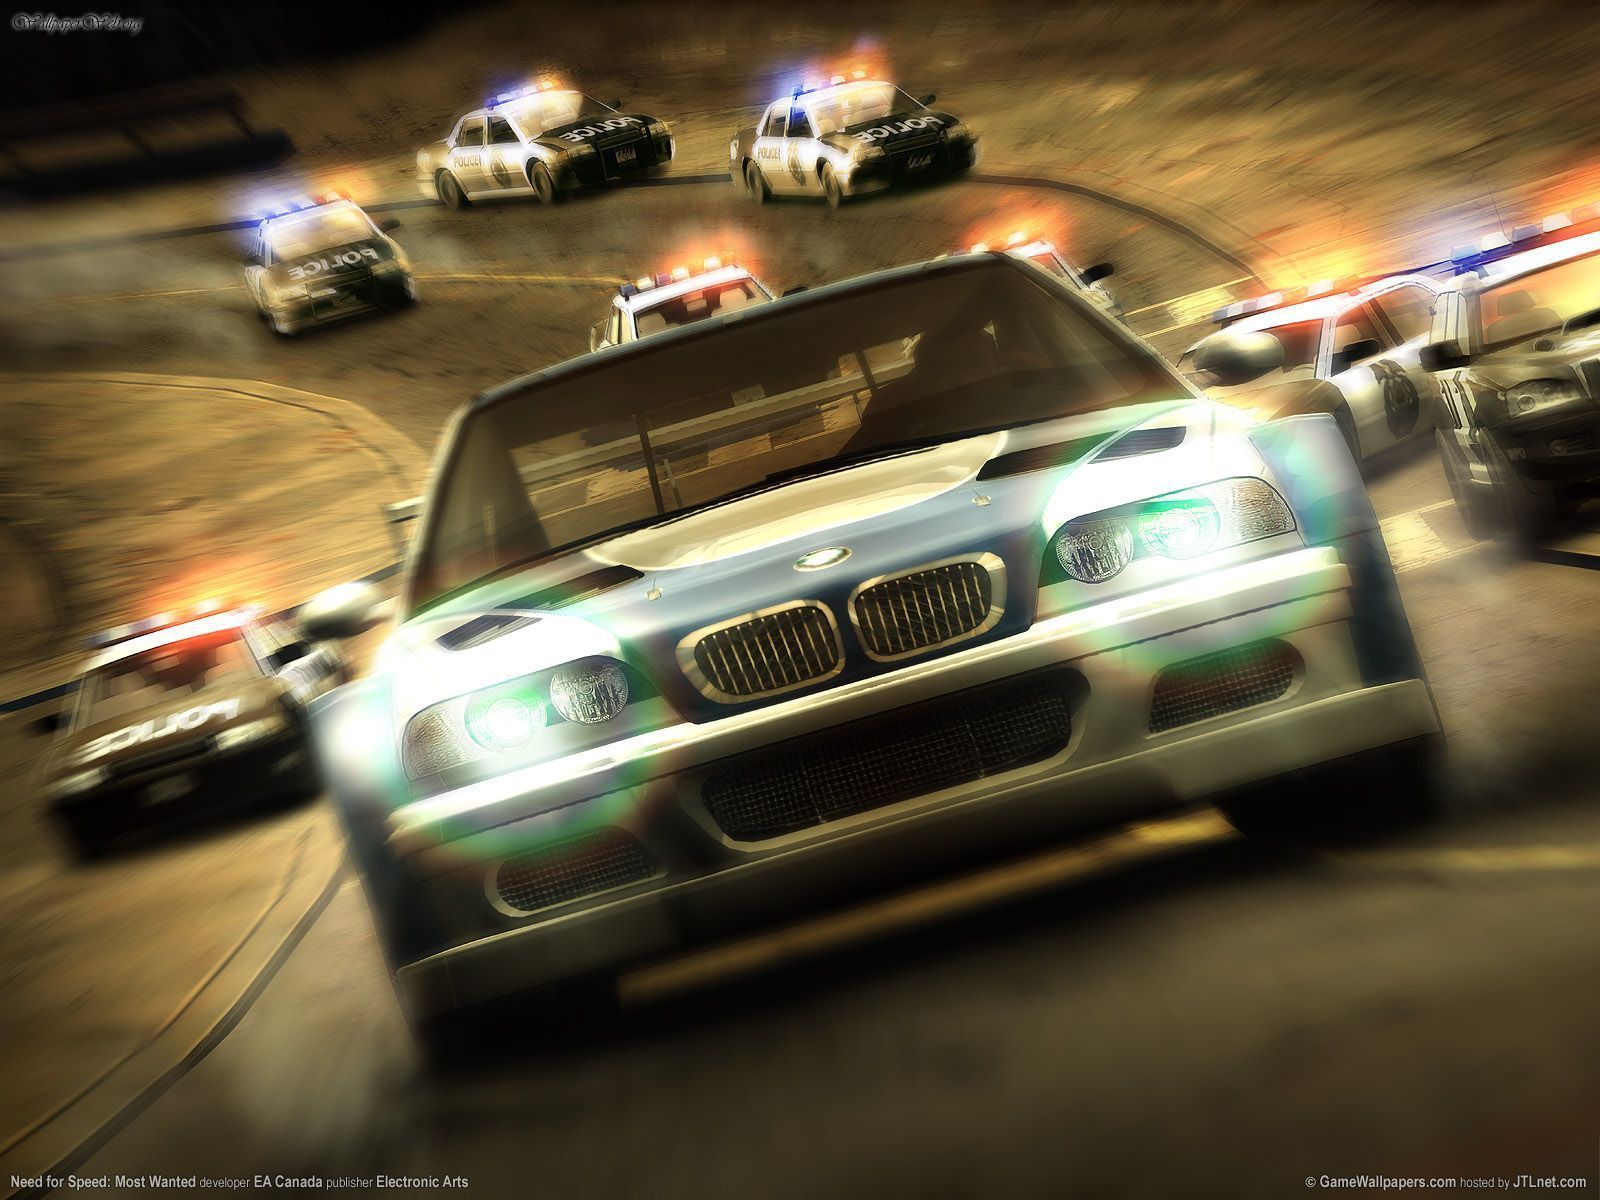 need for speed: most wanted, need for speed, video game